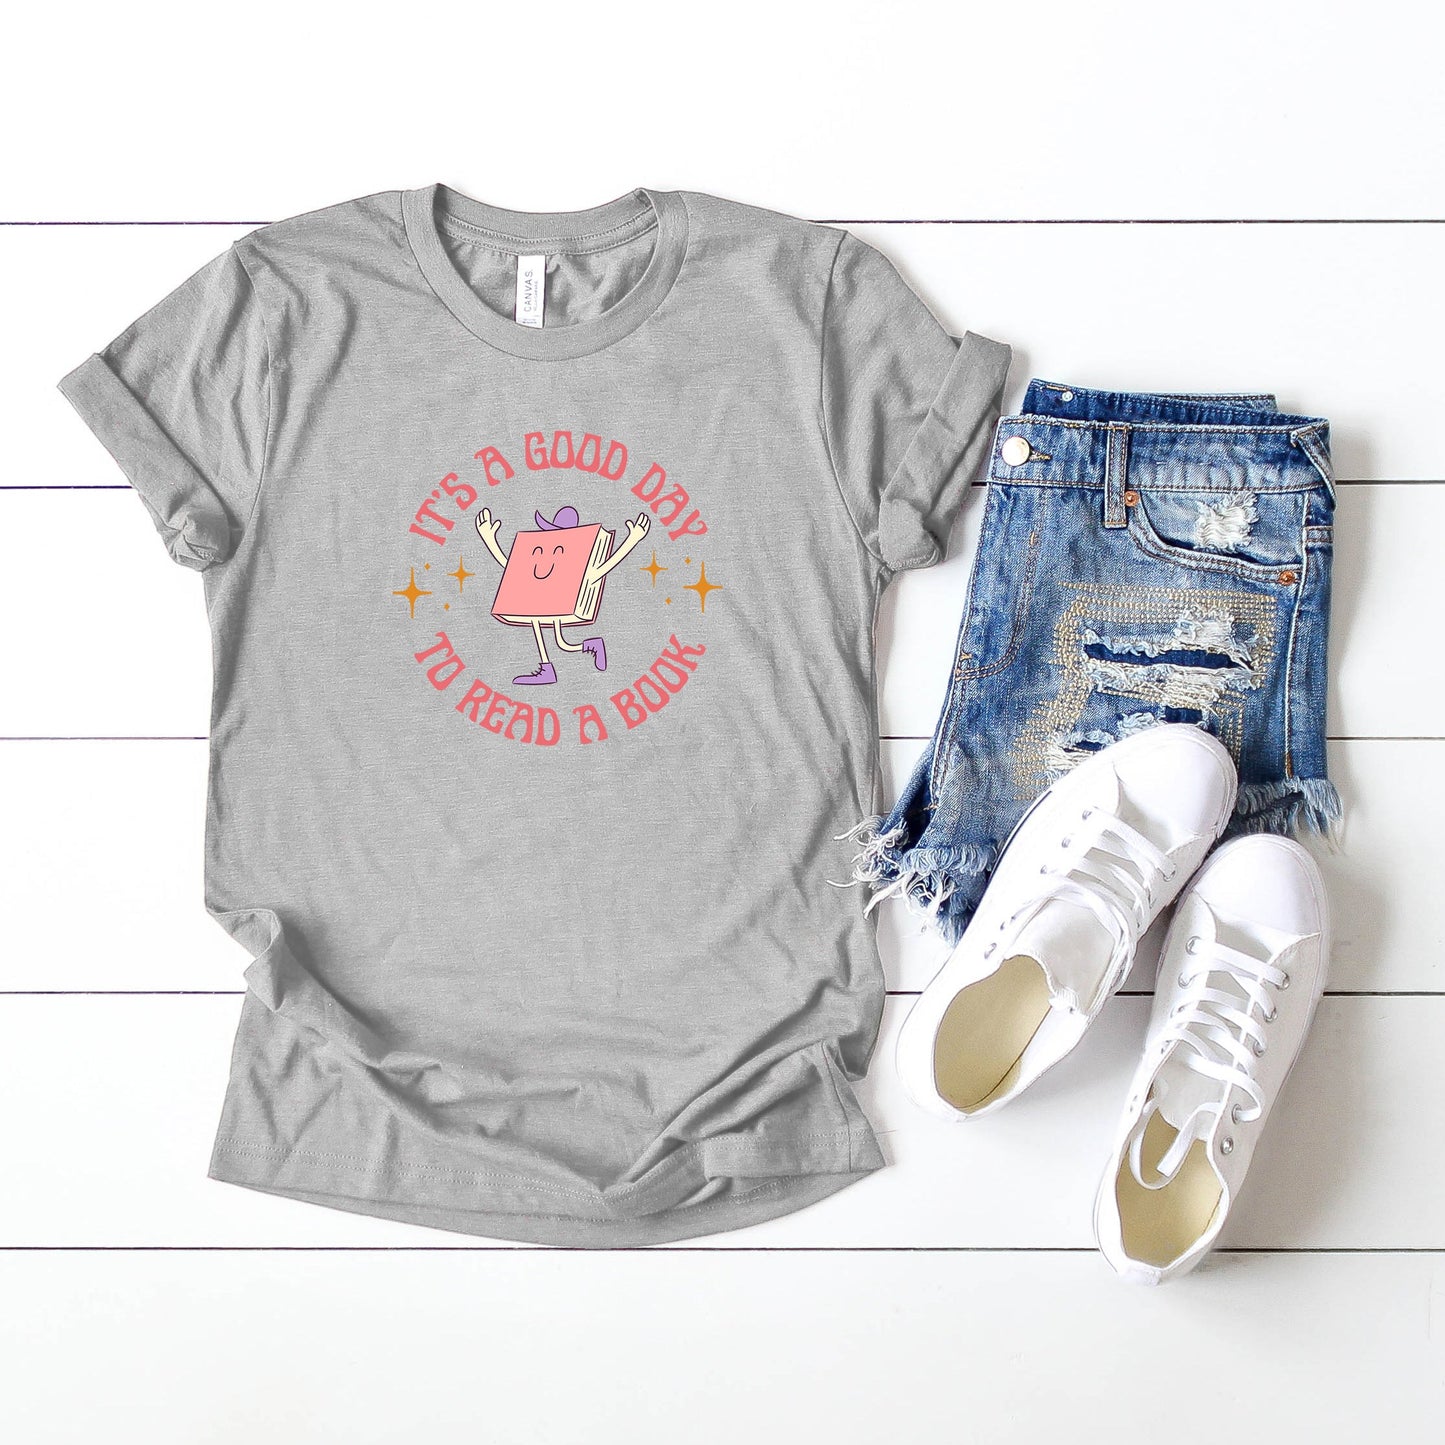 It's A Good Day To Read A Book | Short Sleeve Graphic Tee